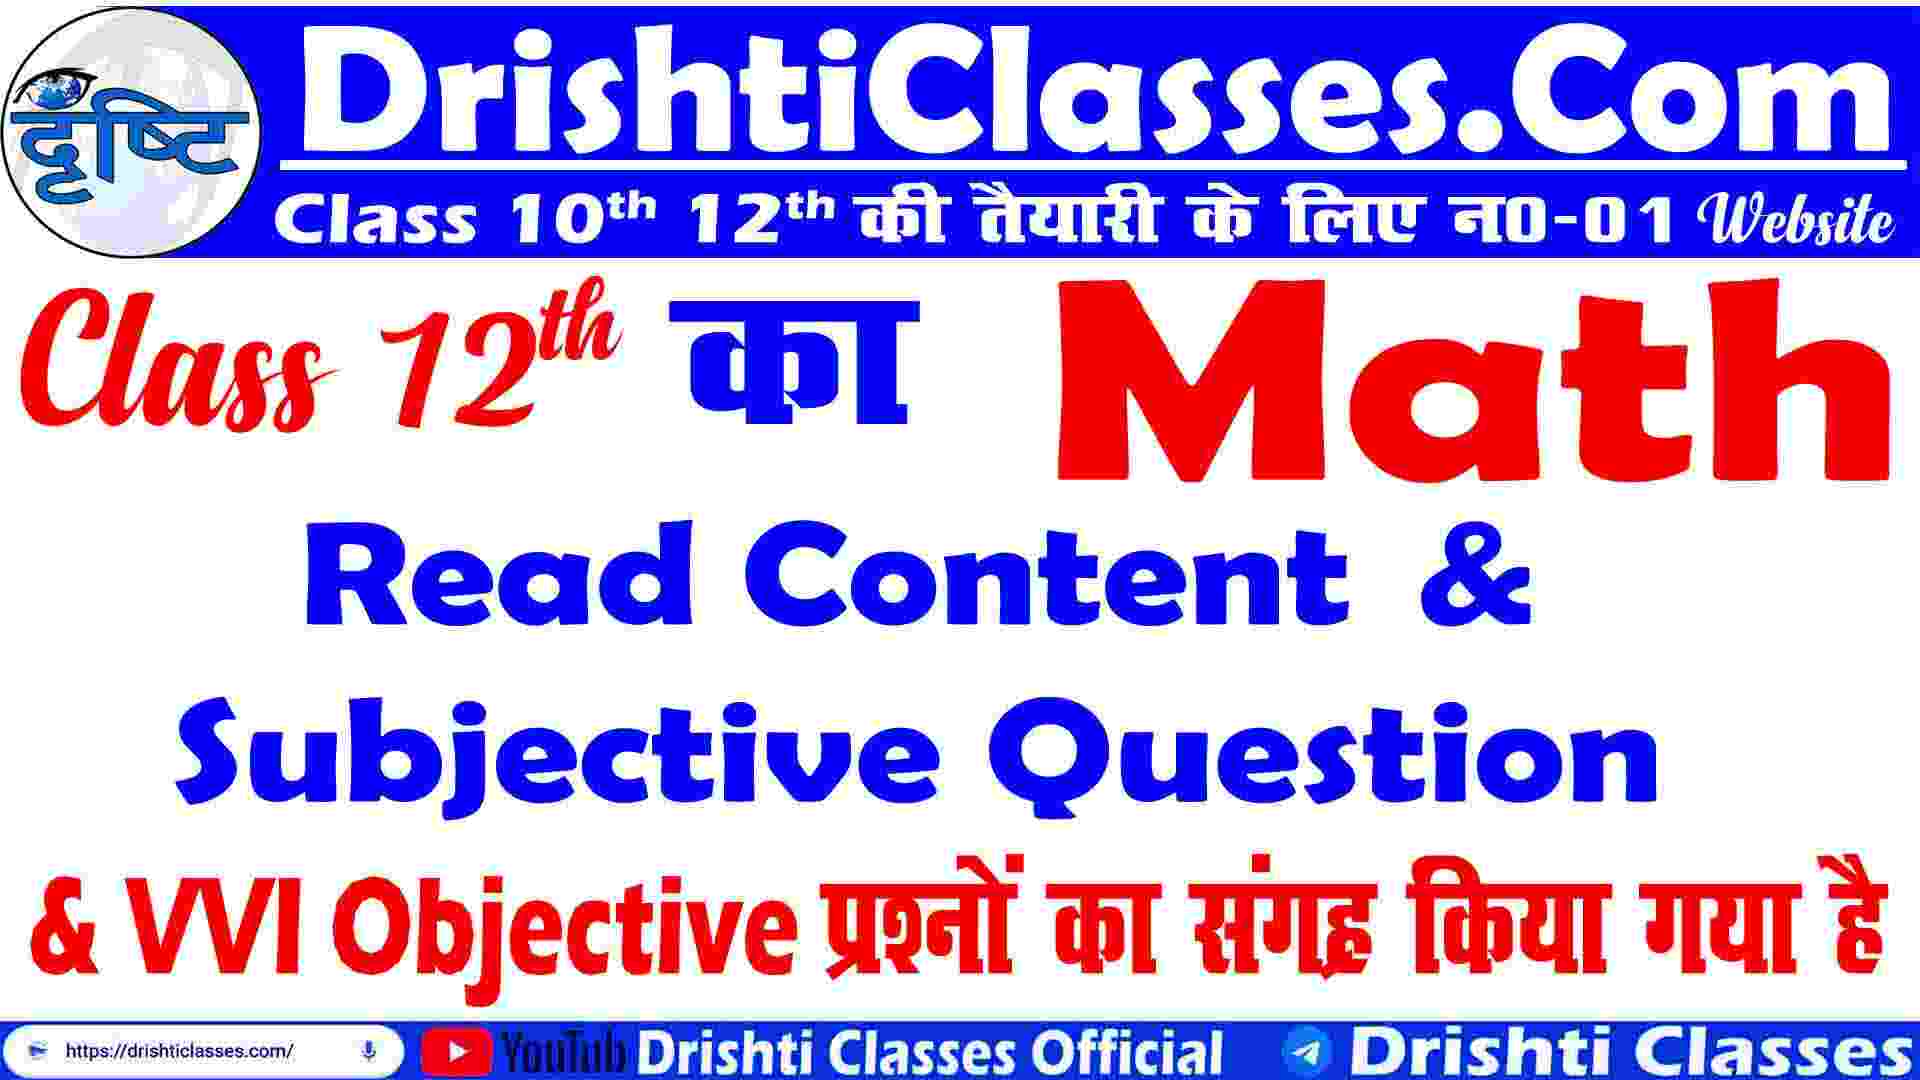 Class 10th Maths Chapter Wise All Topic, important questions for class 10 maths, Bseb Class 10th Math, bseb class 10th math vvi objective questions, bseb class 10th math vvi objective, bseb class 10th math Question Answer